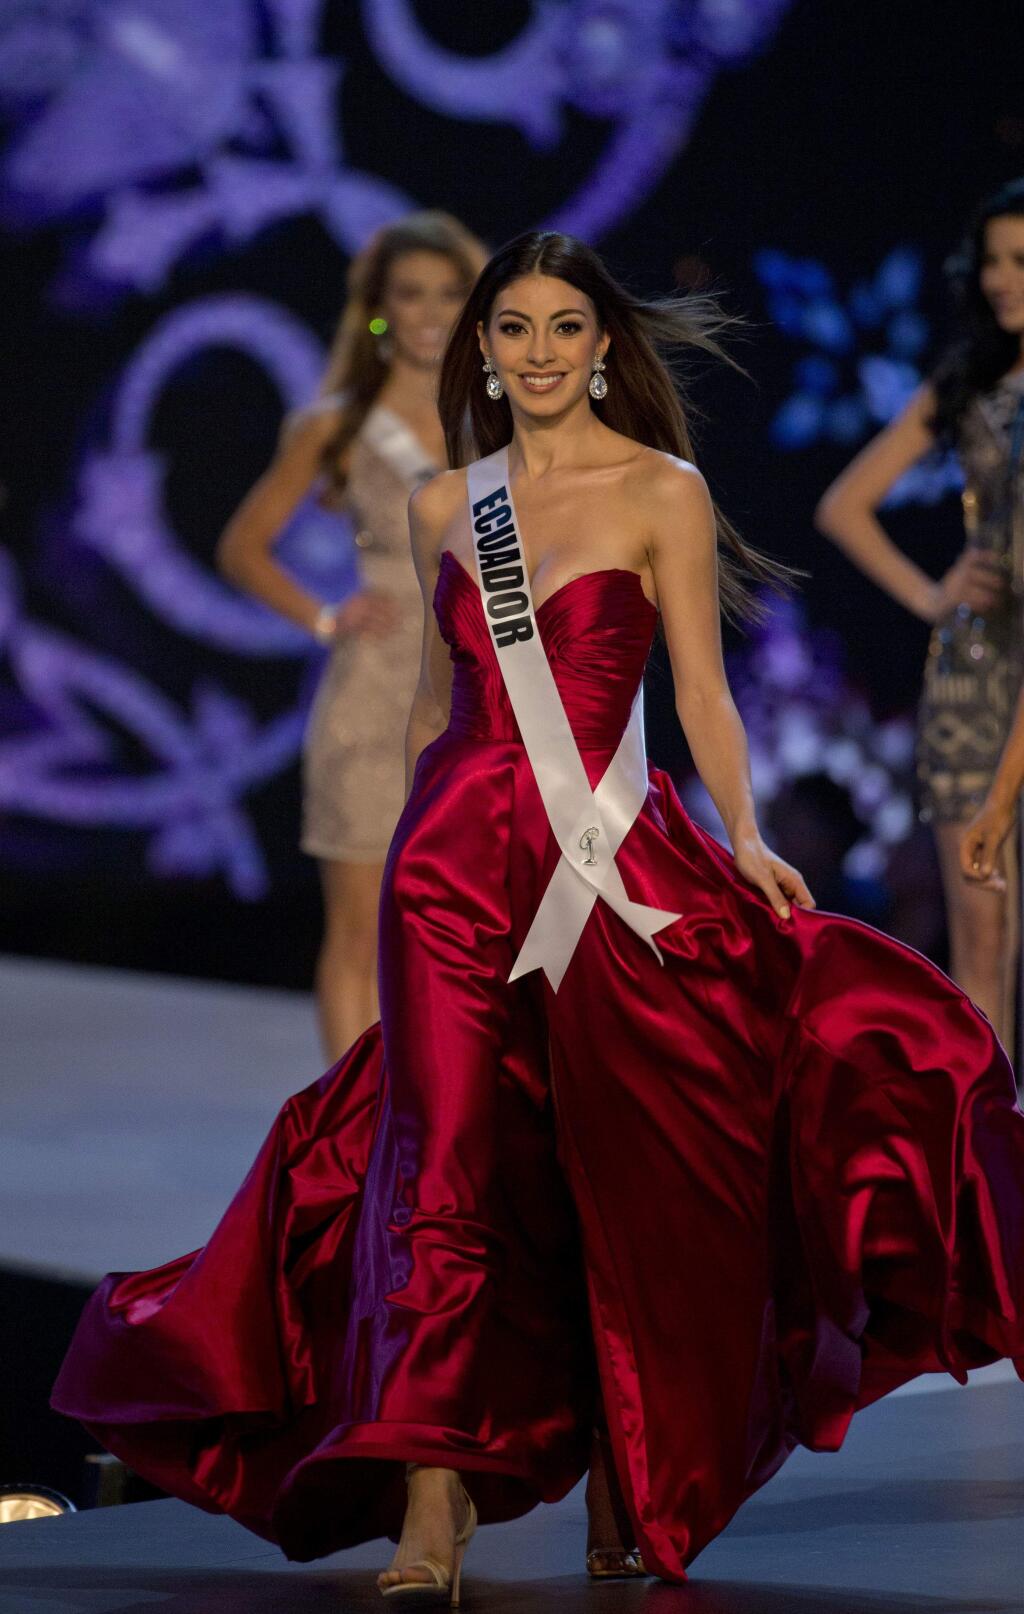 Miss Ecuador Virginia Limongi walks during the swimsuit and evening gown stage of the 67th Miss Universe competition in Bangkok, Thailand, Thursday, Dec. 13, 2018.(AP Photo/Gemunu Amarasinghe)